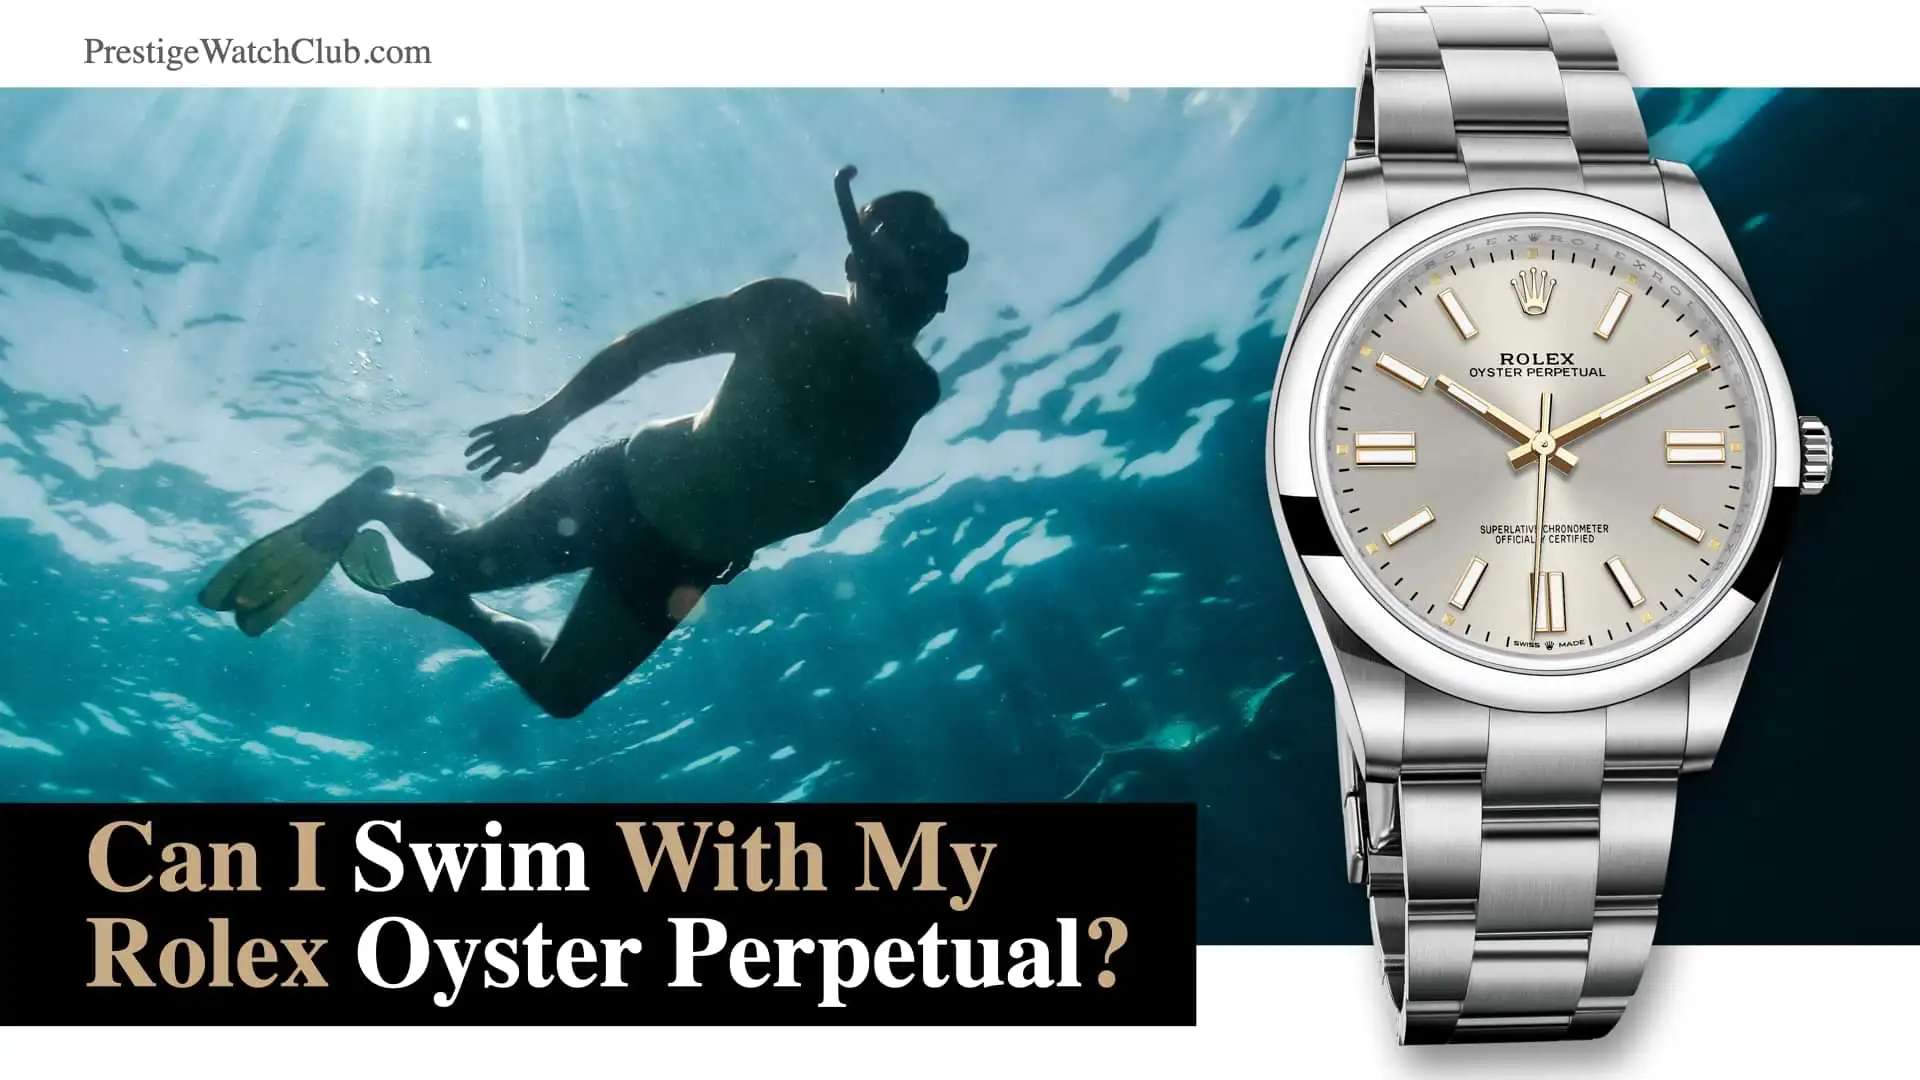 Can I Swim With My Rolex Oyster Perpetual?